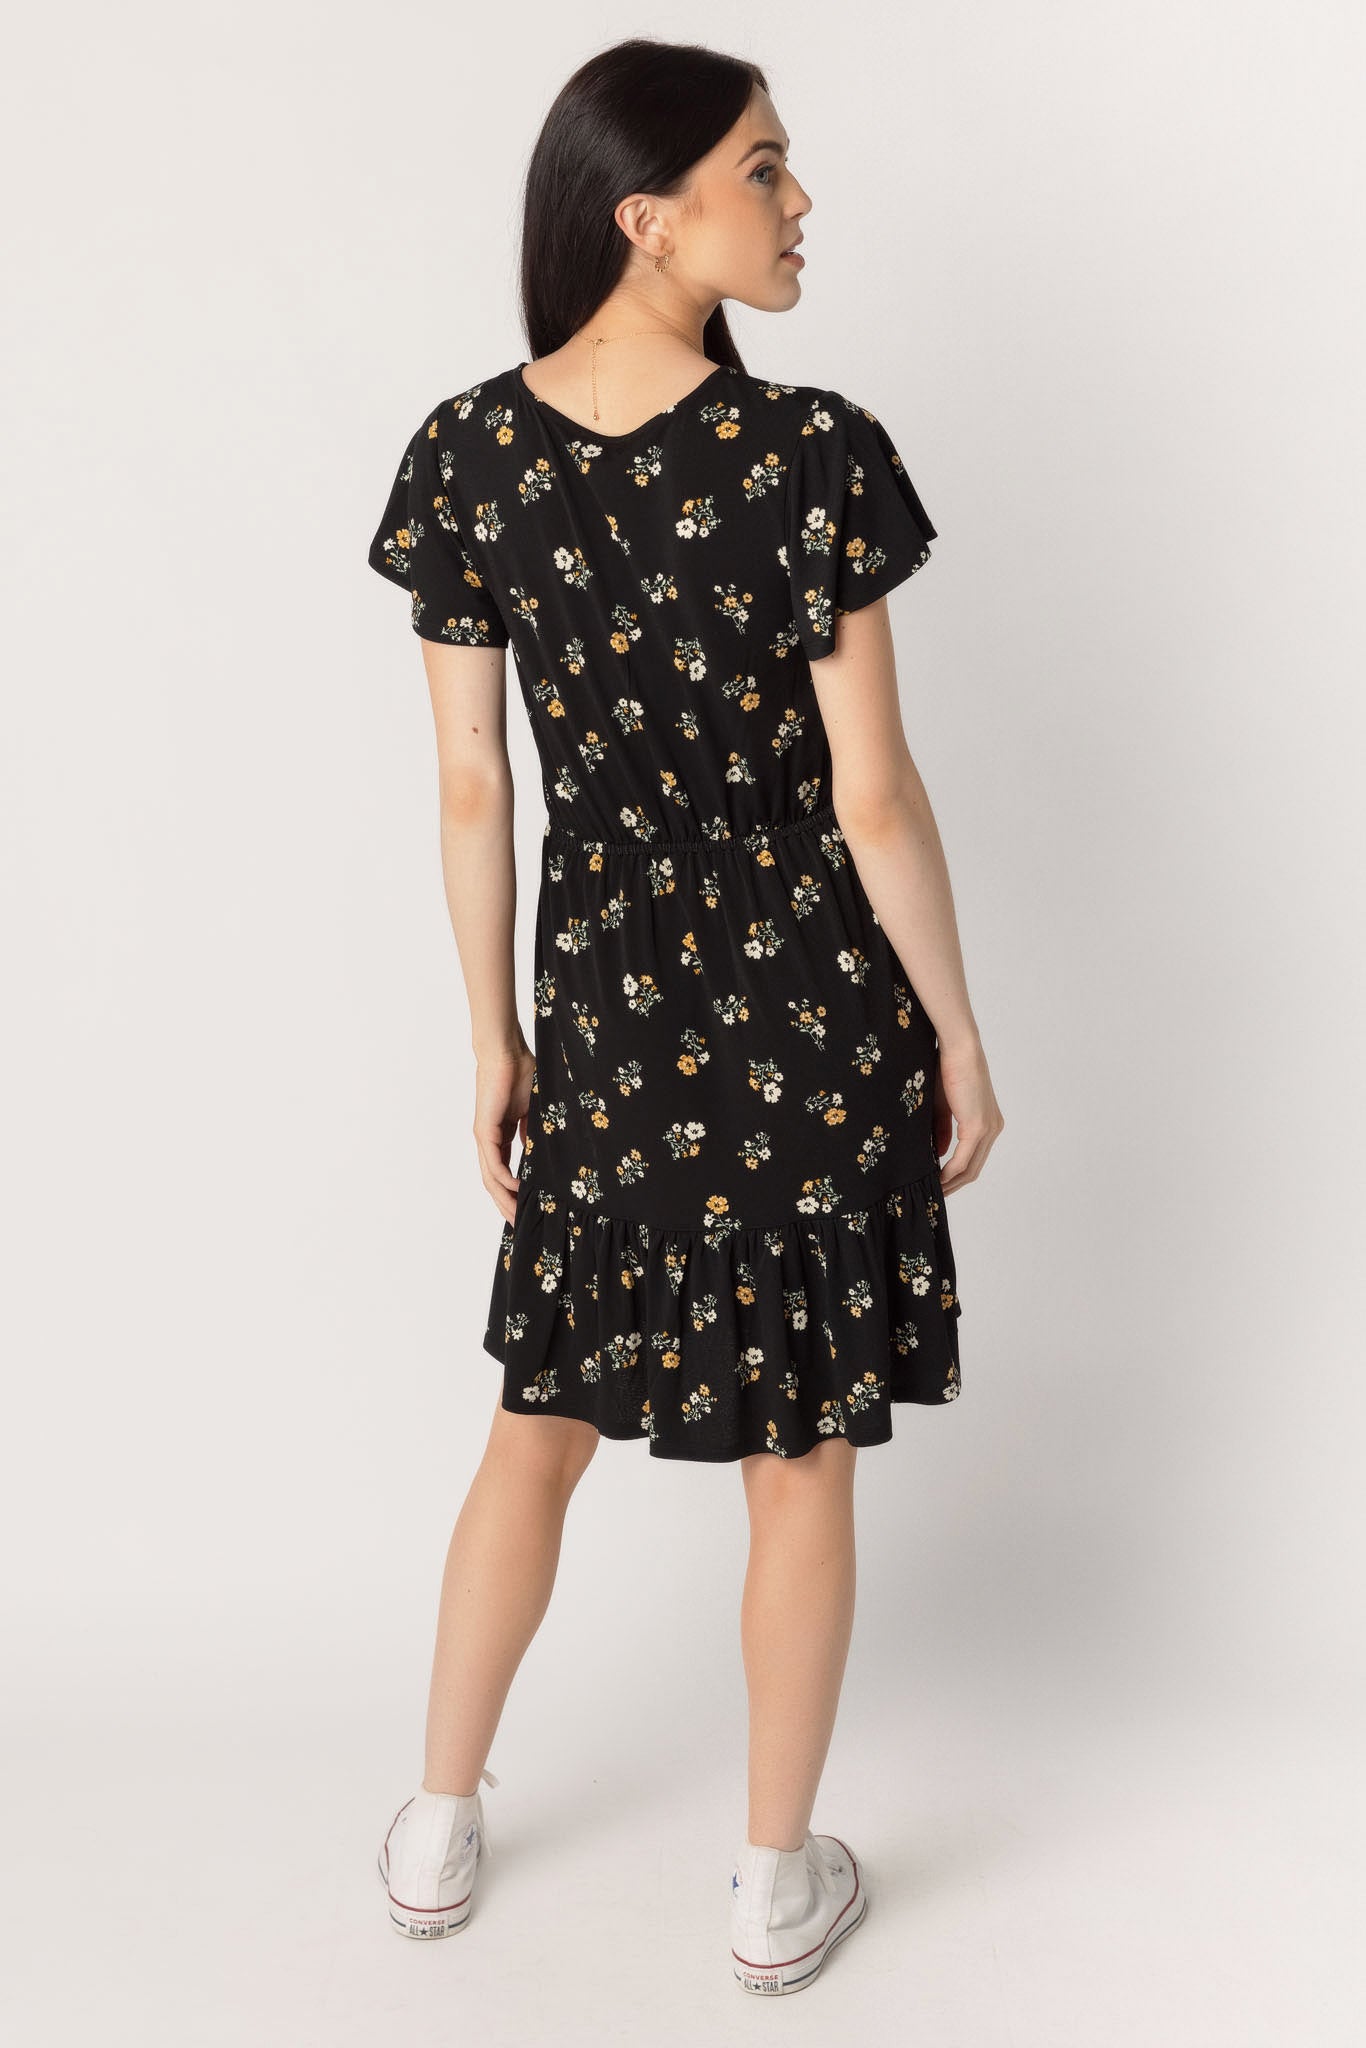 Ditsy Flutter Sleeve Dress with Buttons and Ruffle Hem